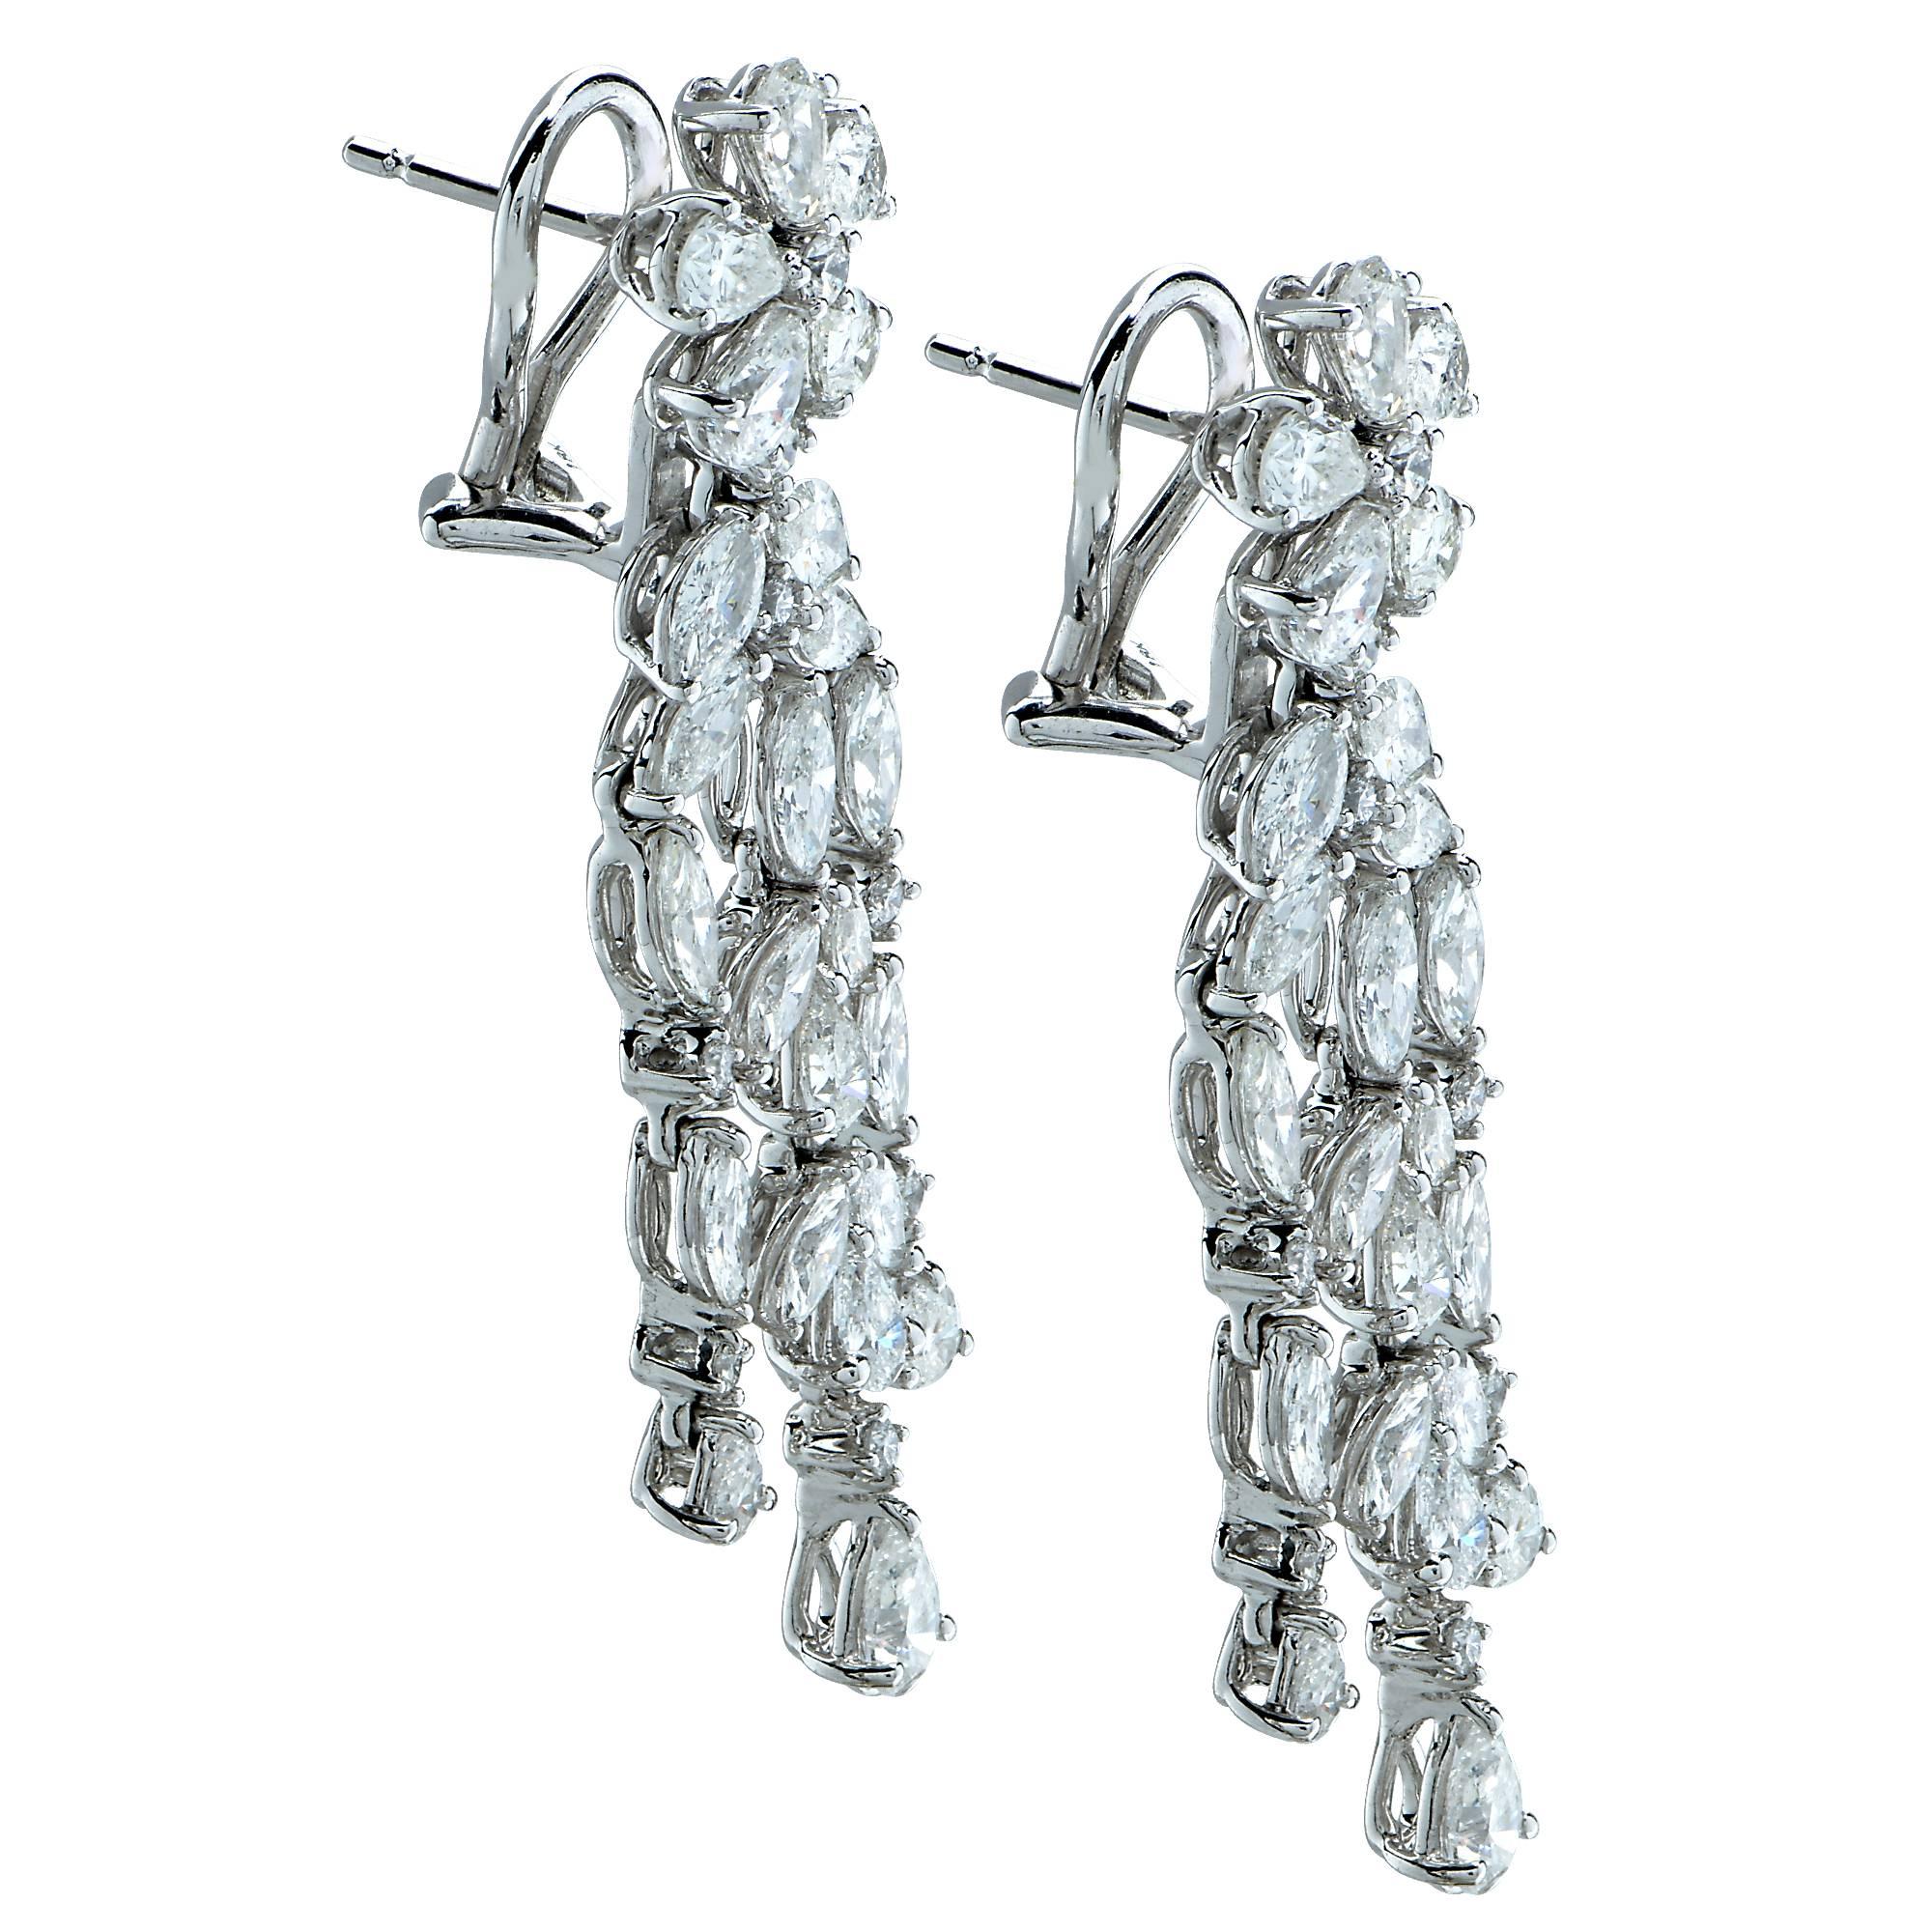 Dazzling diamond dangle earrings comprising a stunning collection of 62 round brilliant cut, marquees cut and pear shape diamonds, with a total estimated weight of approximately 5 Carats, set in 18k white gold. 

Our pieces are all accompanied by an